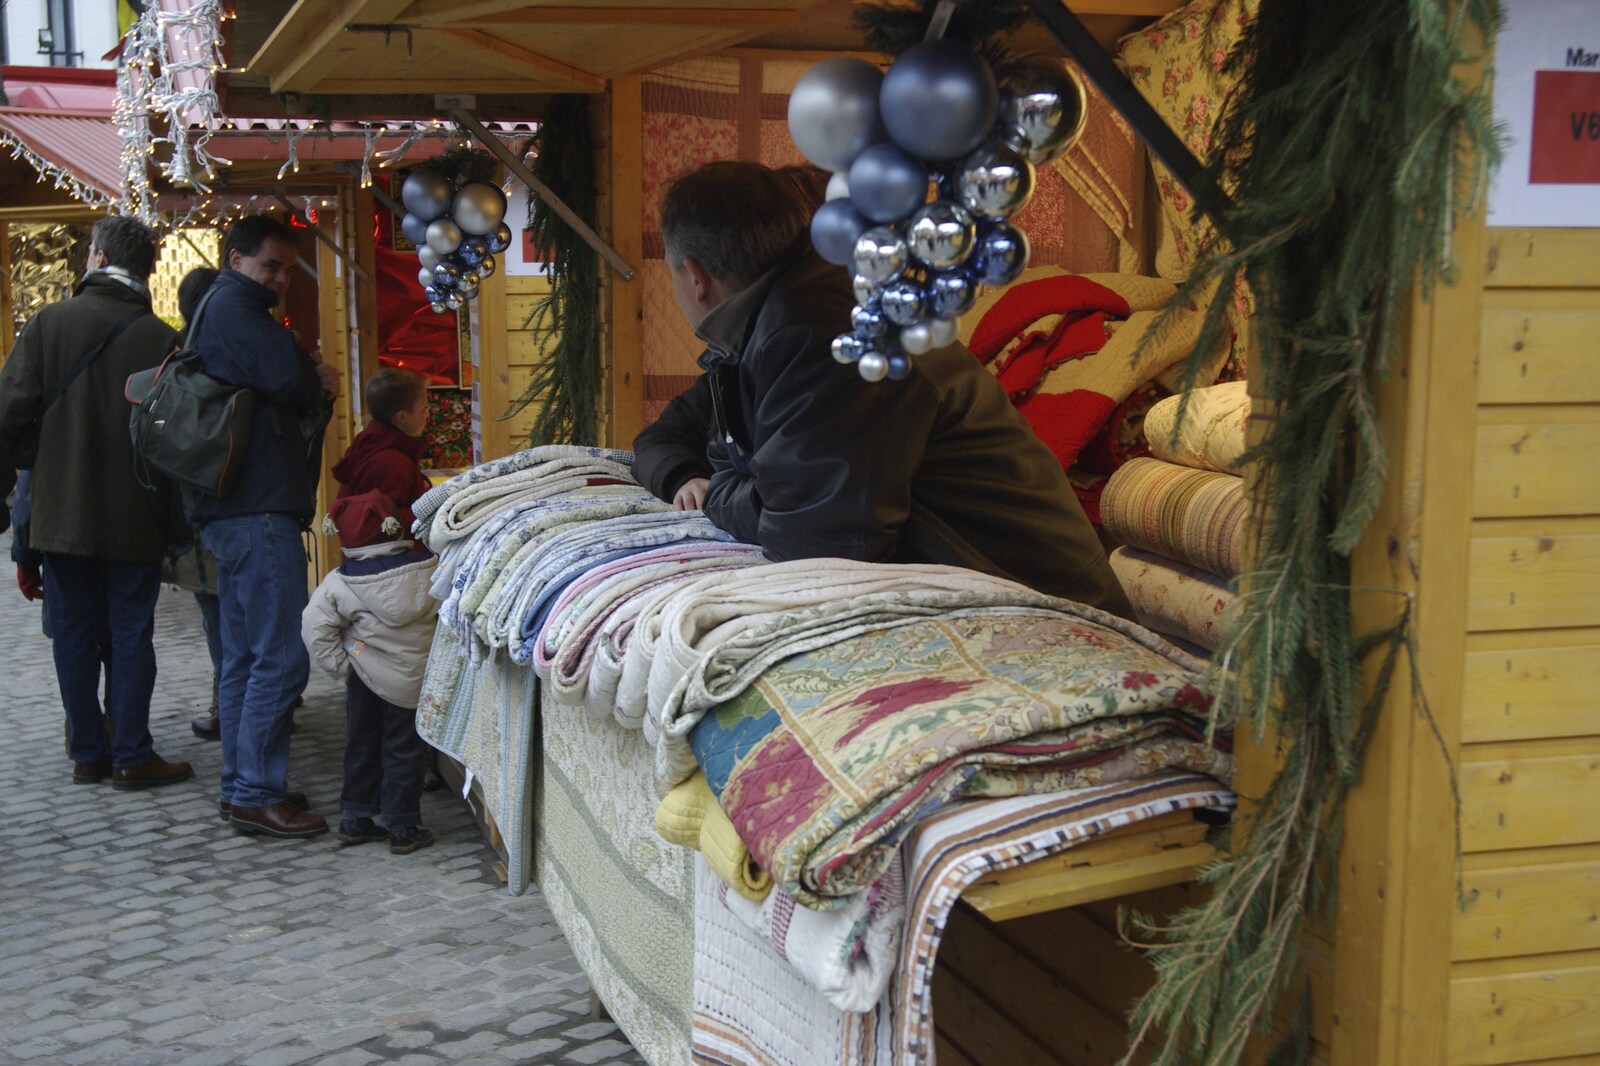 A rug seller from The Christmas Markets of Brussels, Belgium - 1st January 2007